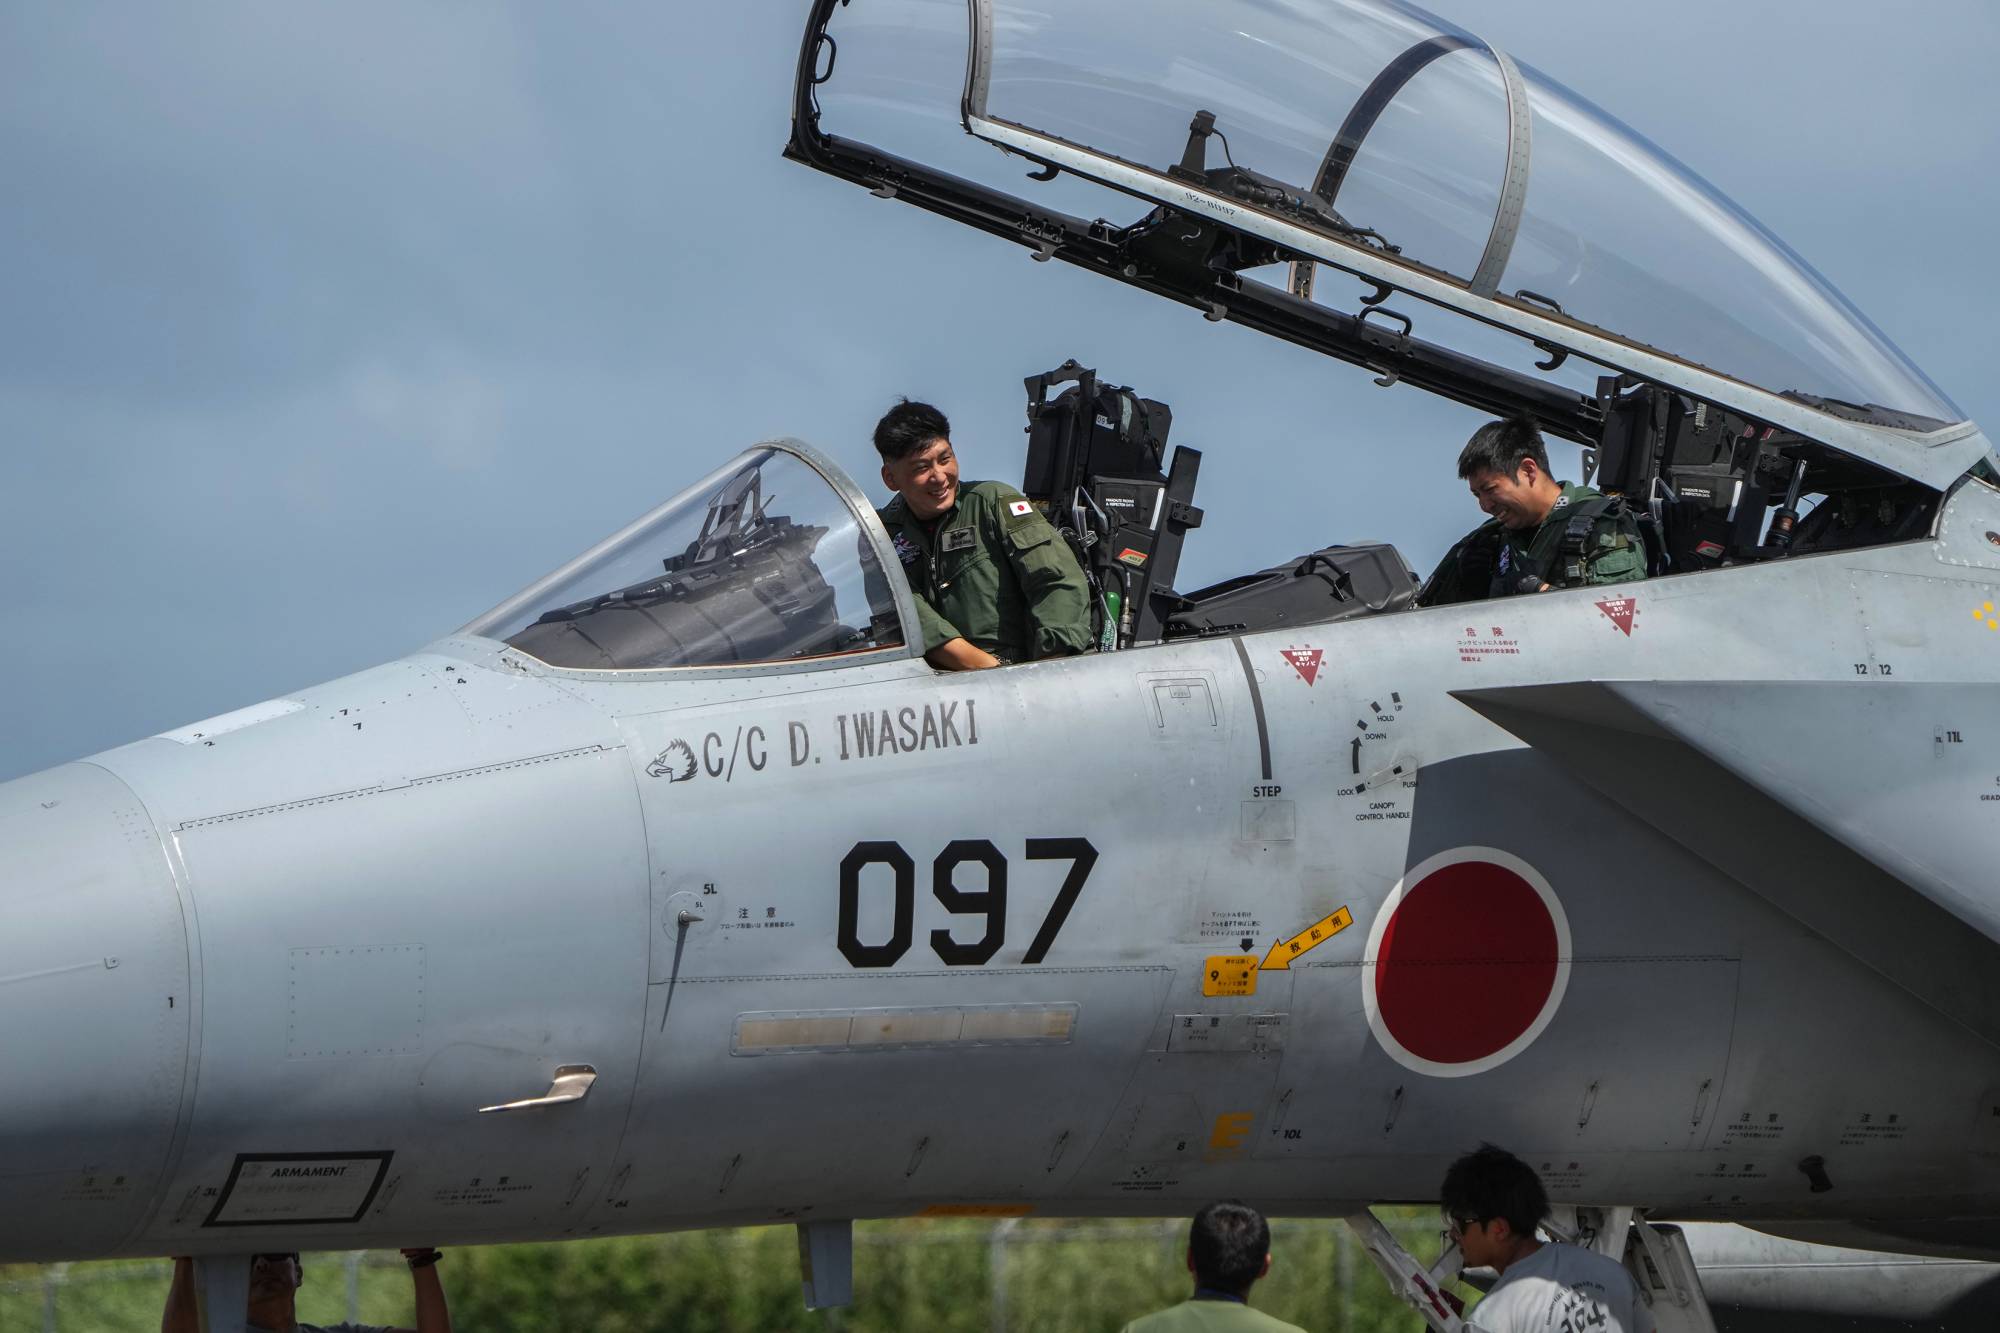 Japanese pilots refuel an F-15 fighter jet at the Tinian airport on Feb. 17. | CHANG W. LEE / THE NEW YORK TIMES